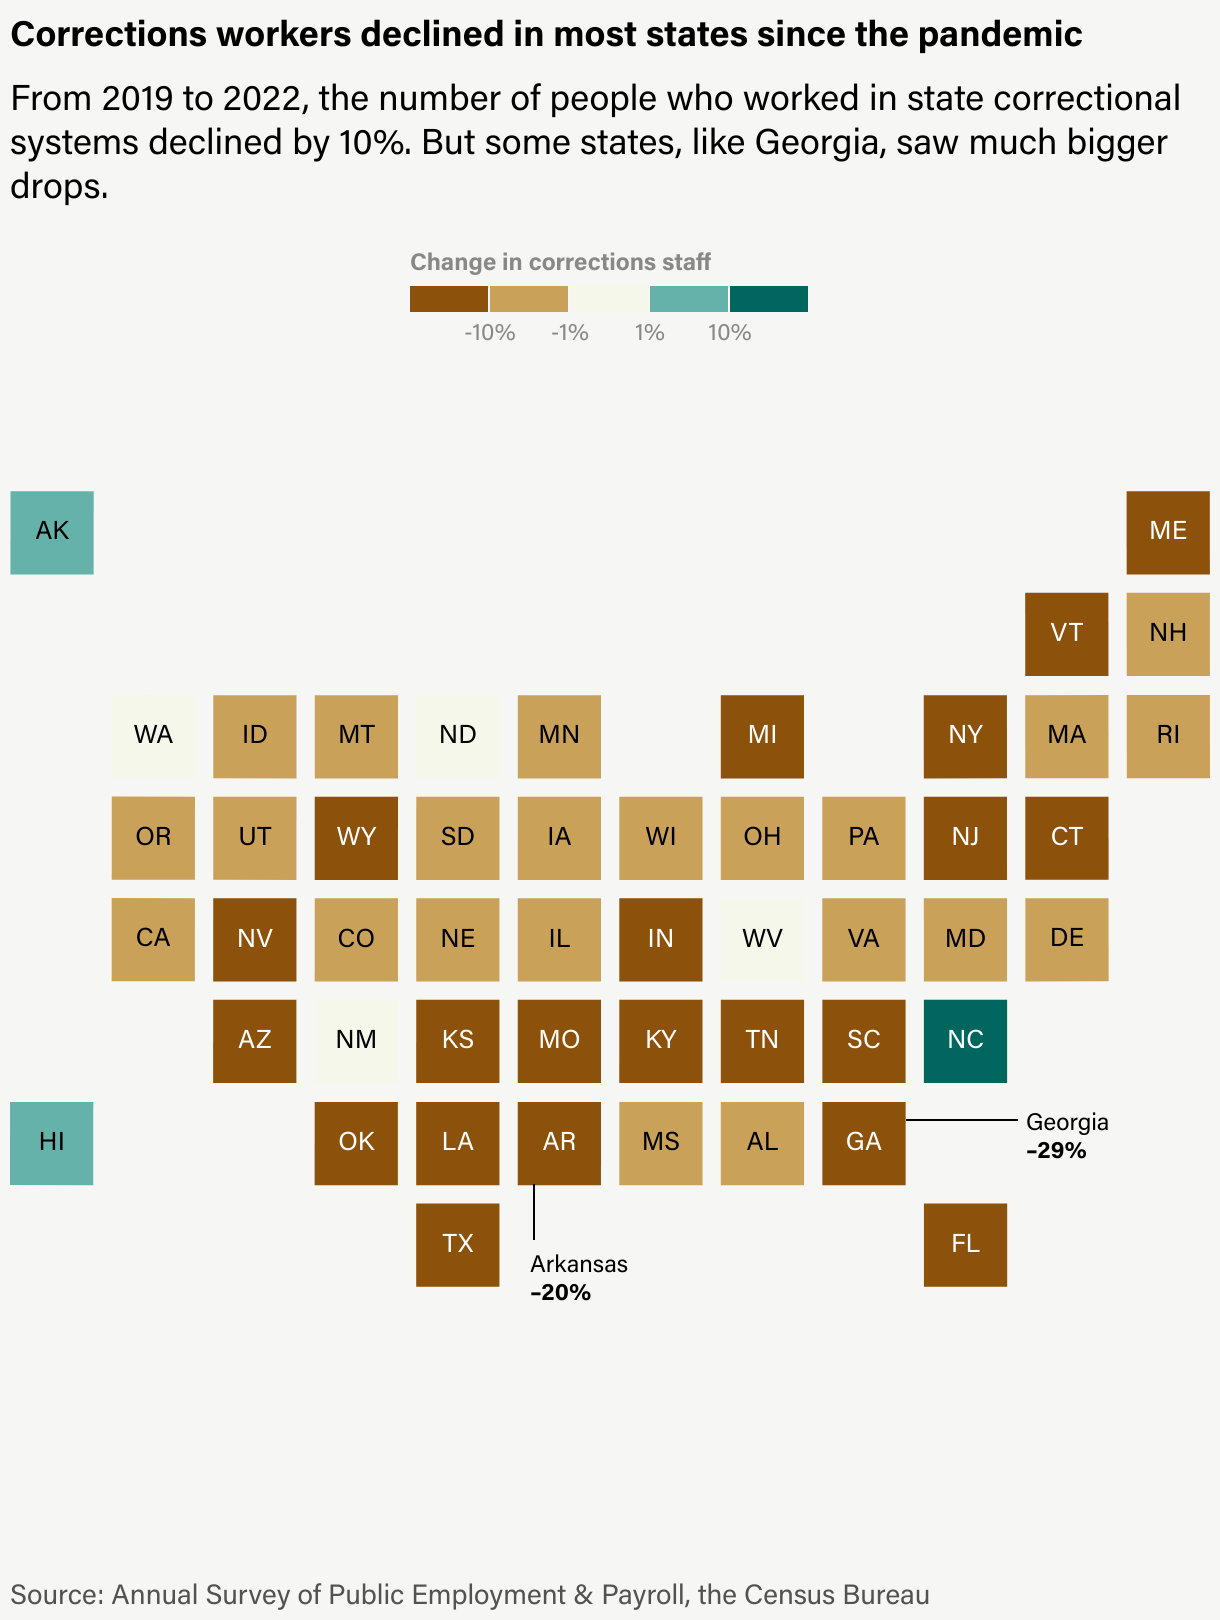 graphic showing which states corrections workers declined in since the pandemic